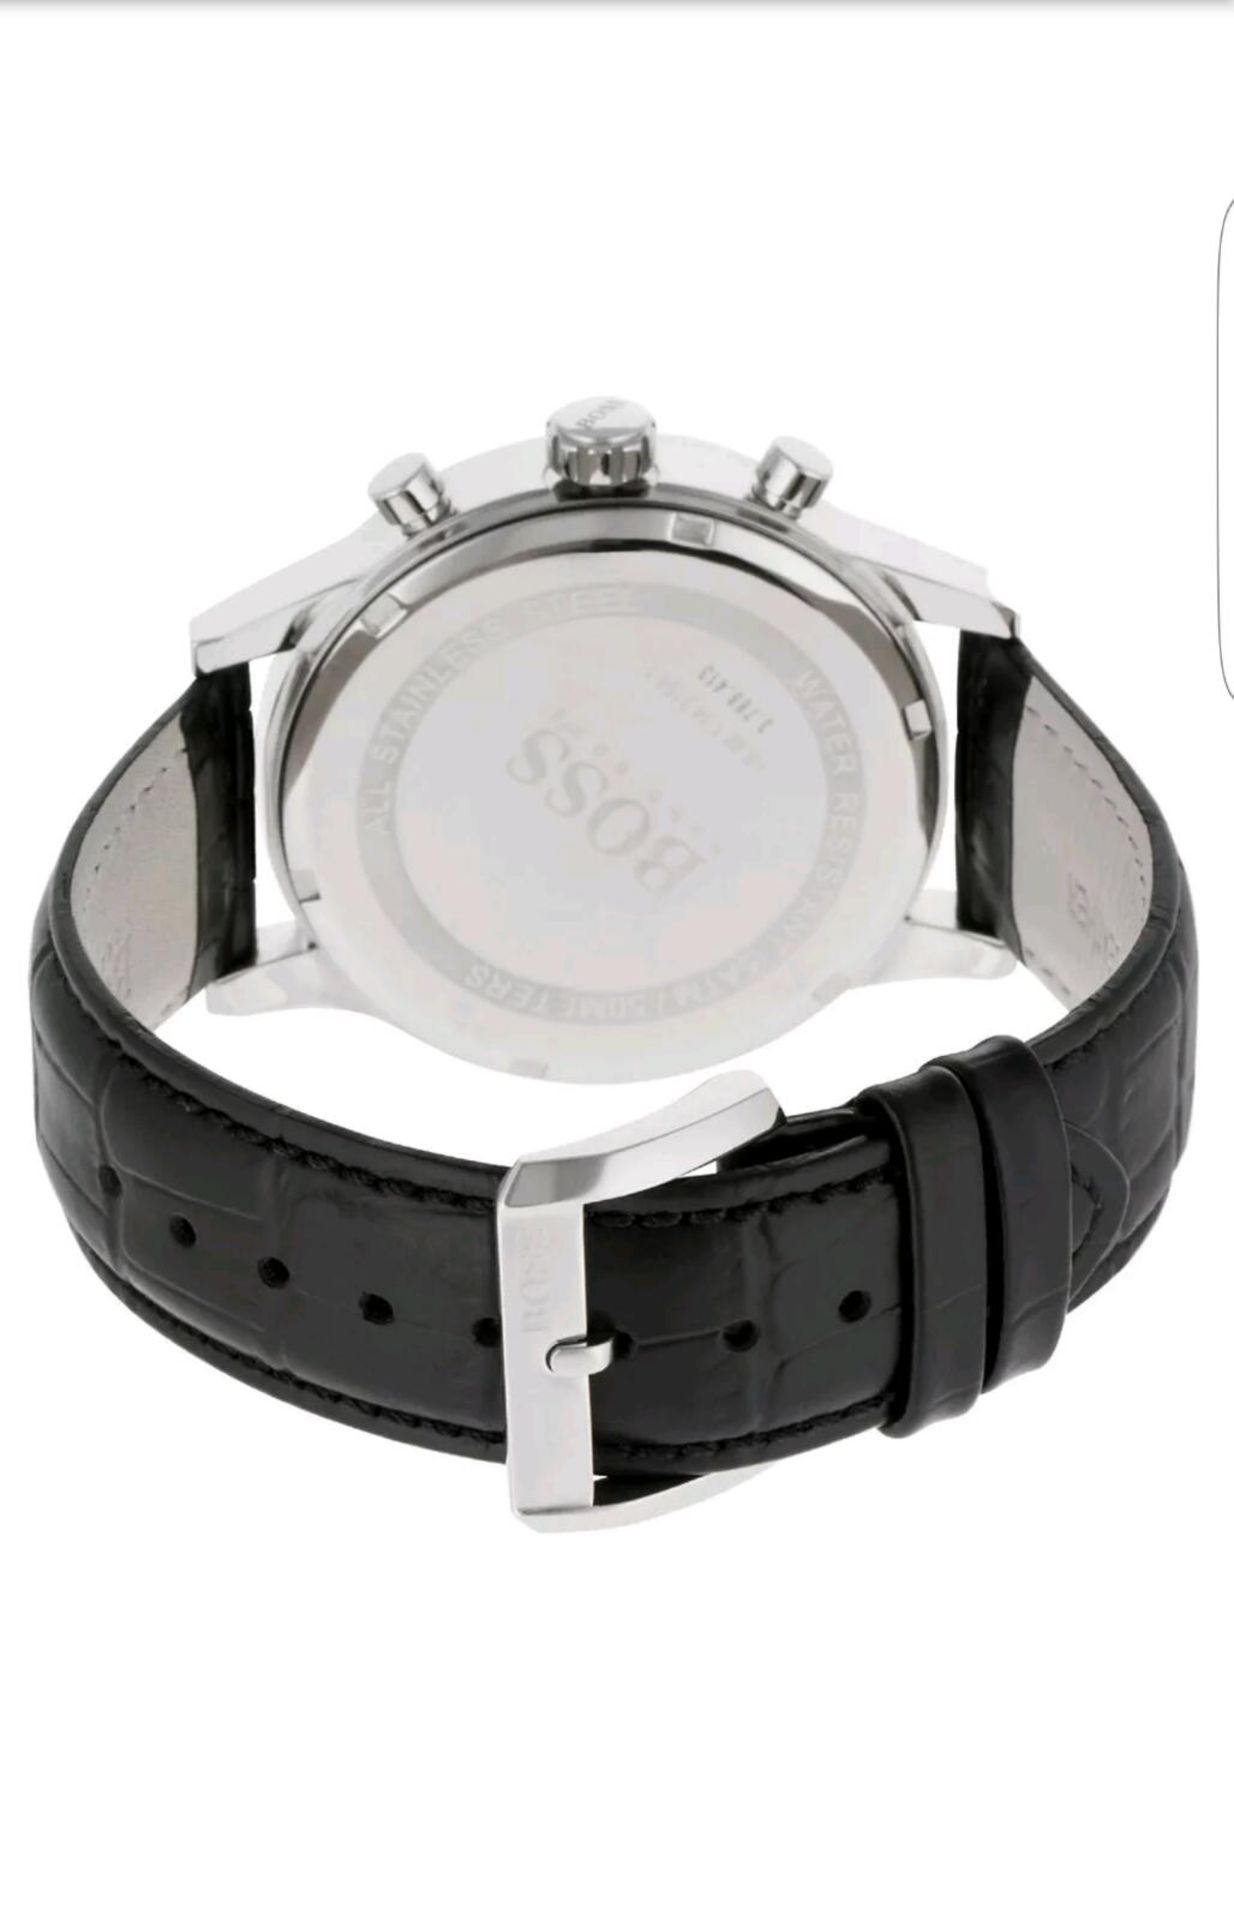 BRAND NEW GENTS HUGO BOSS WATCH 1512448, COMPLETE WITH ORIGINAL PACKAGING AND MANUAL - FREE P & P - Bild 2 aus 2